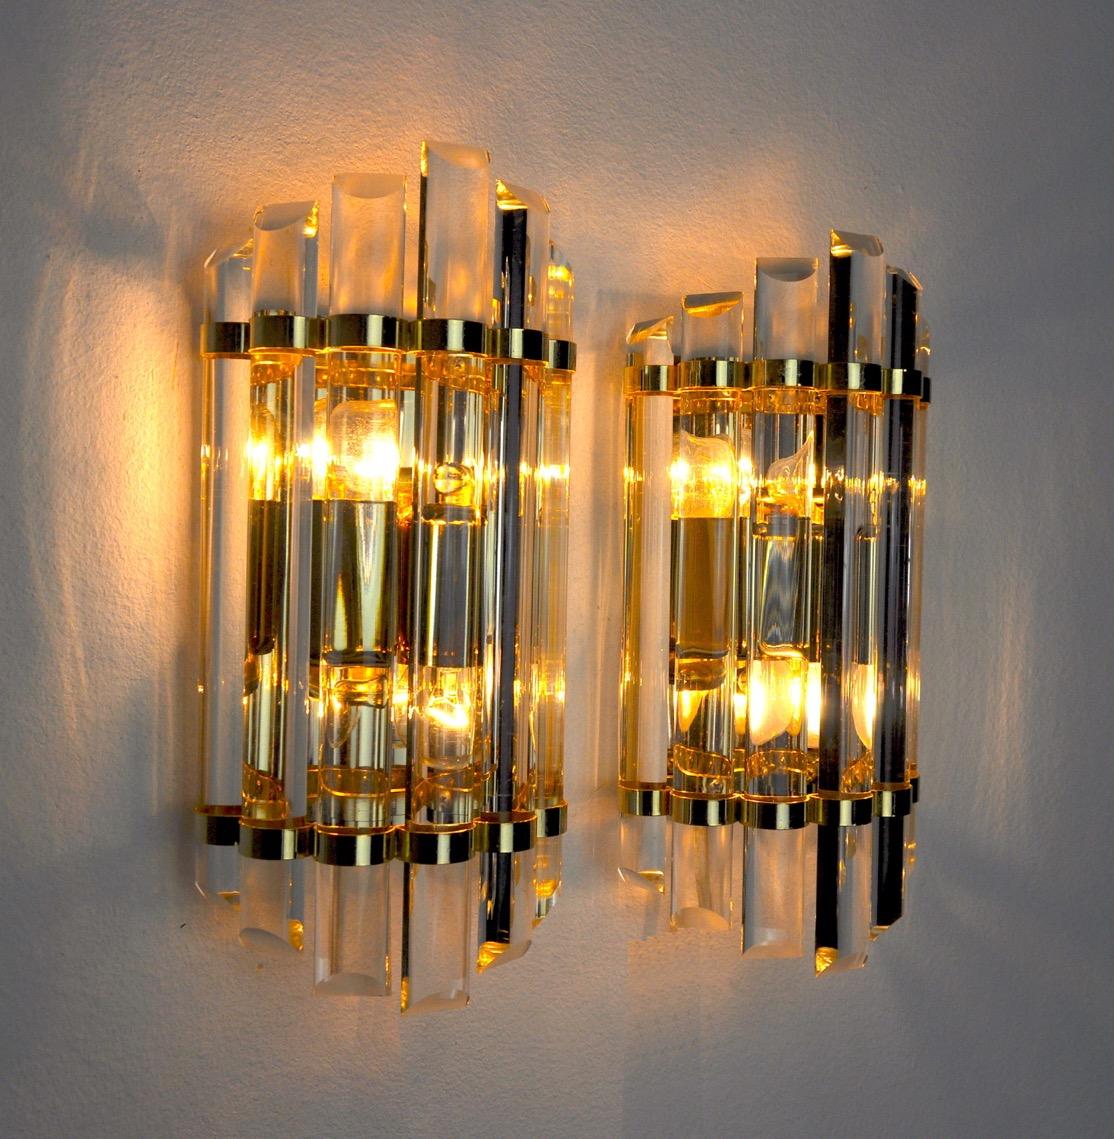 Pair of Venini Wall Lamps, Murano Glass, Italy, 1970 For Sale 2